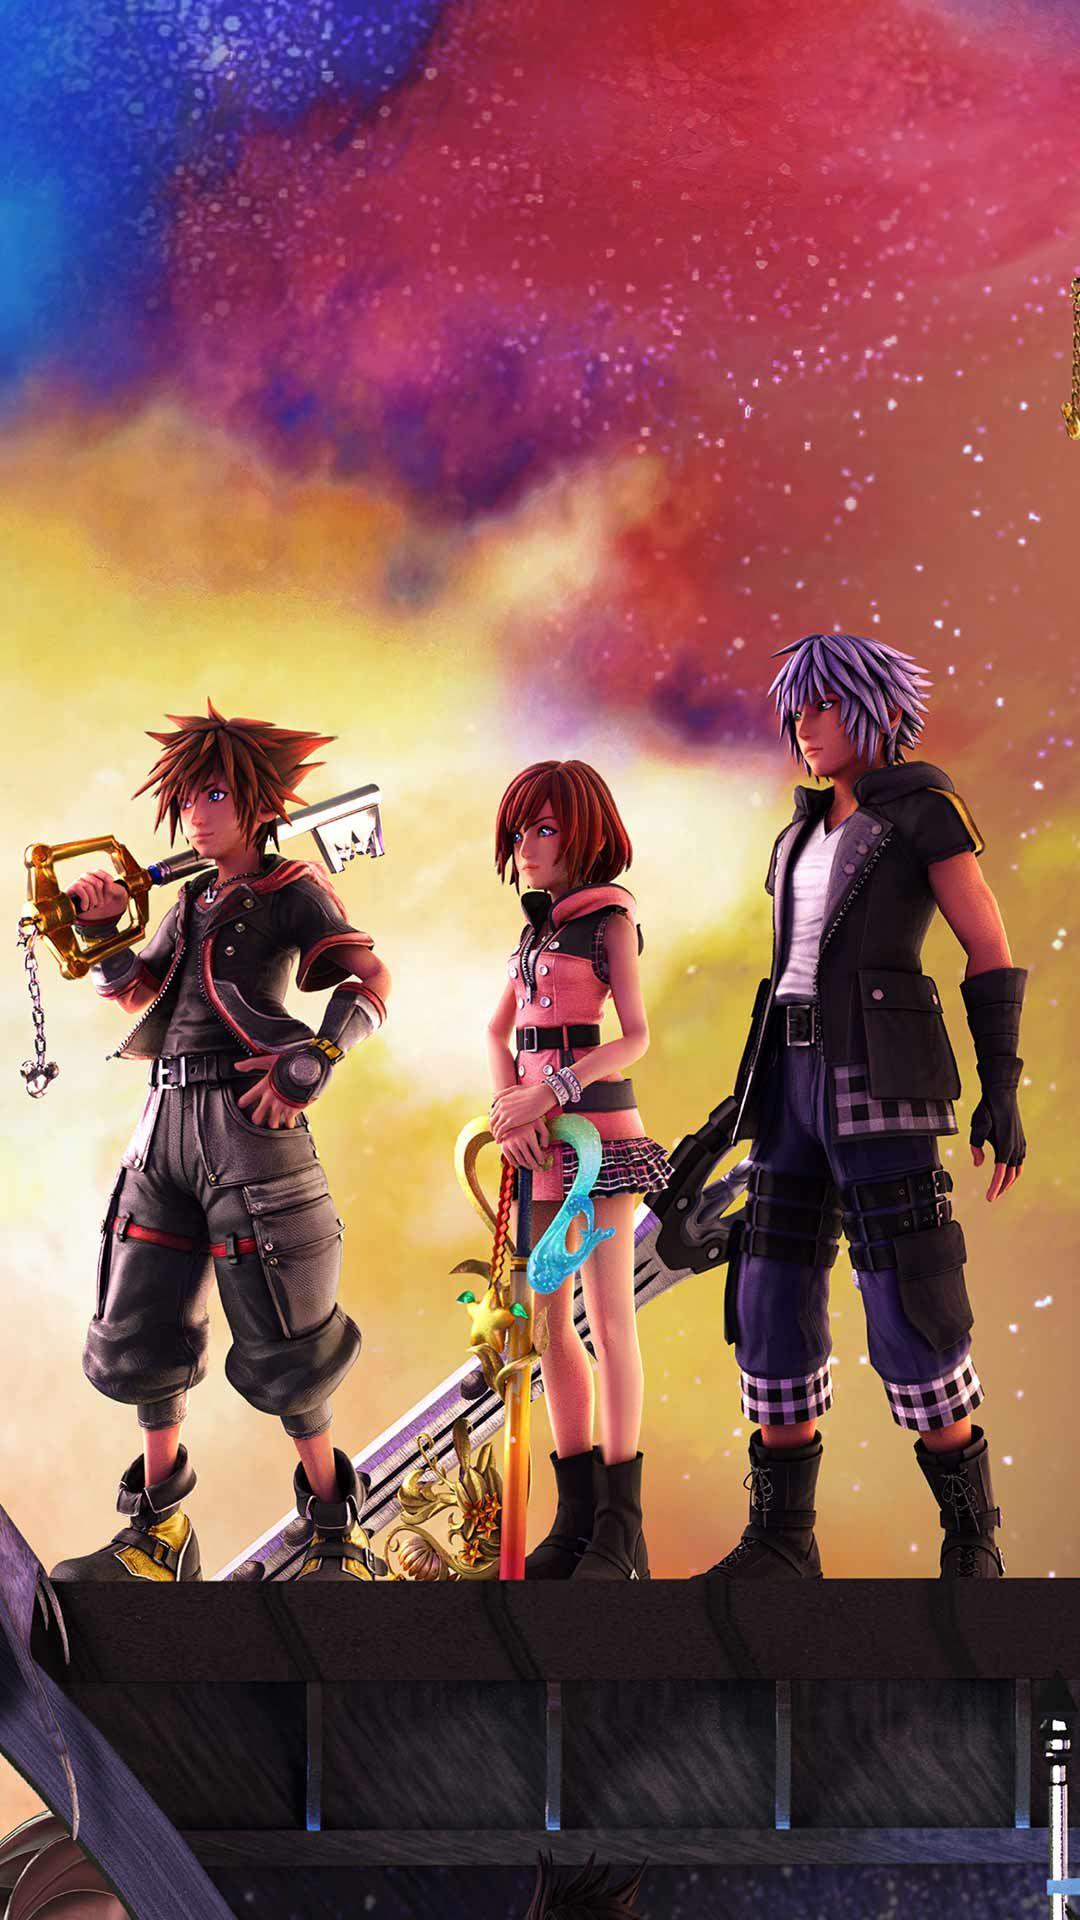 1080 x 1920 · jpeg - Get some Kingdom hearts 3 game HD images as iPhone android wallpaper ...